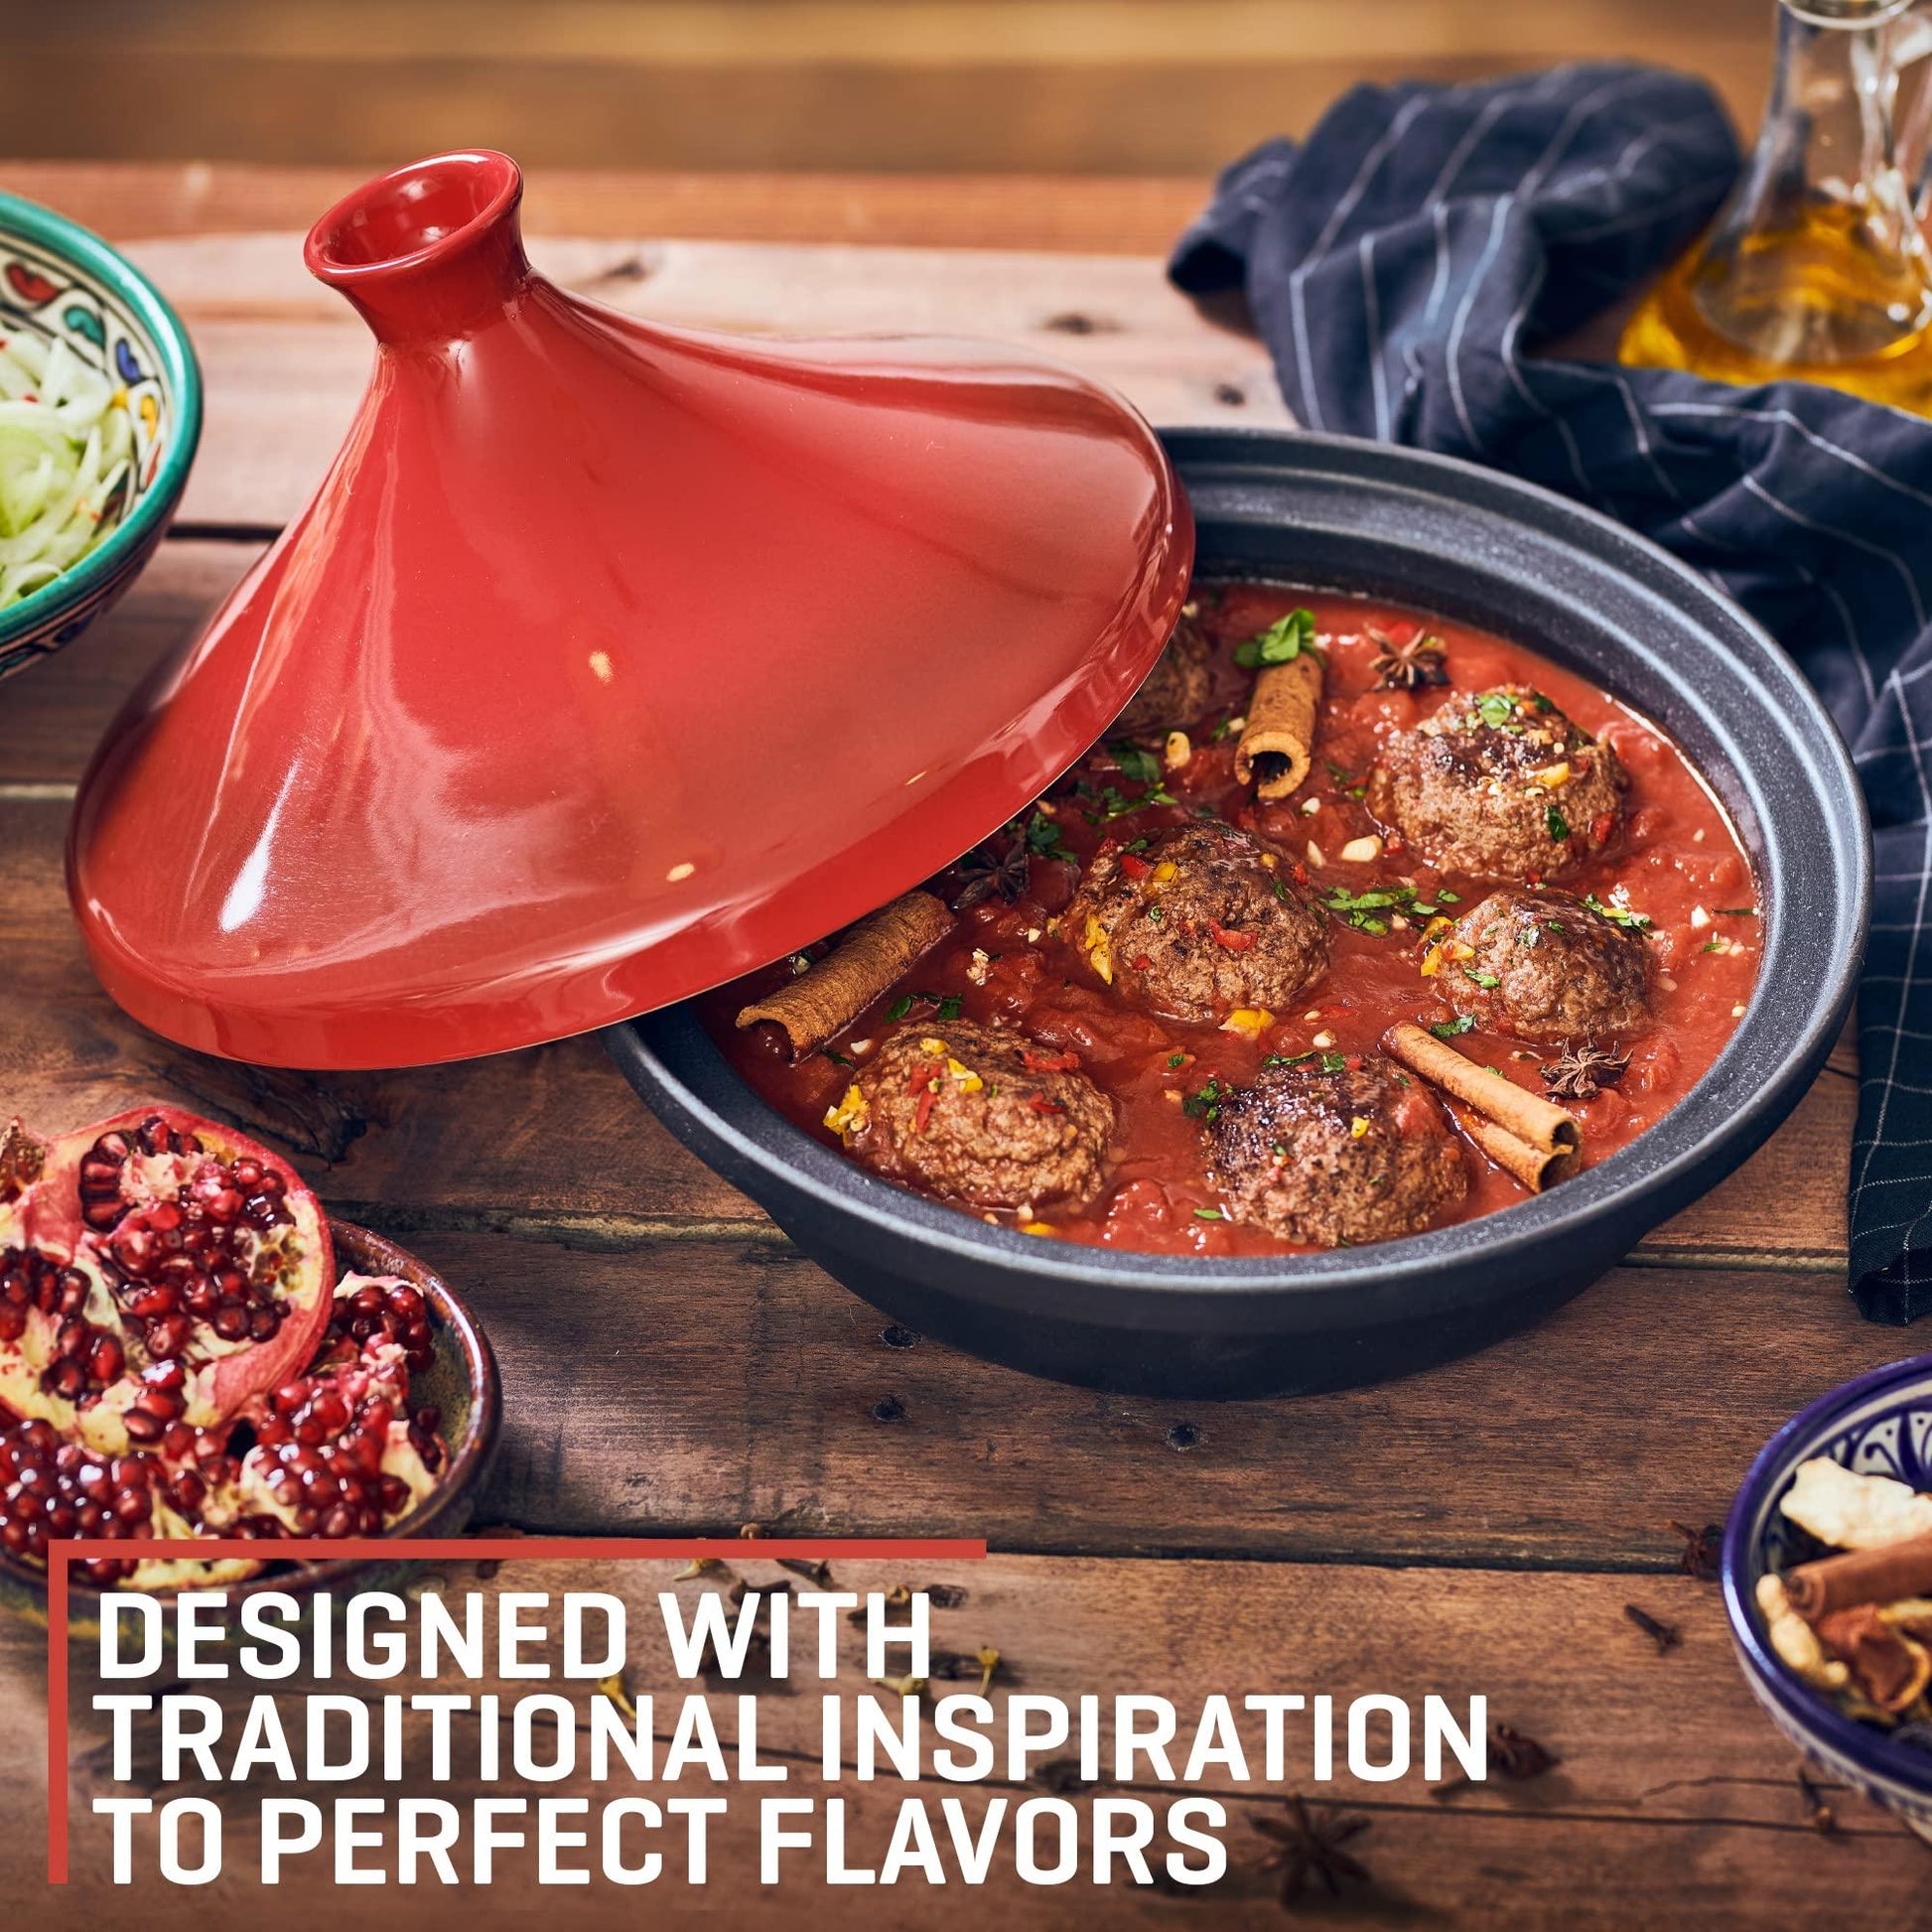 Uno Casa Cast Iron Tagine Pot Moroccan for Cooking - 3.65 Quart Tajine Pot Moroccan with Enameled Cast Iron Base and Ceramic Lid, Finest Cookware - Tangine Pot Red Double Oven Mitts Included - CookCave